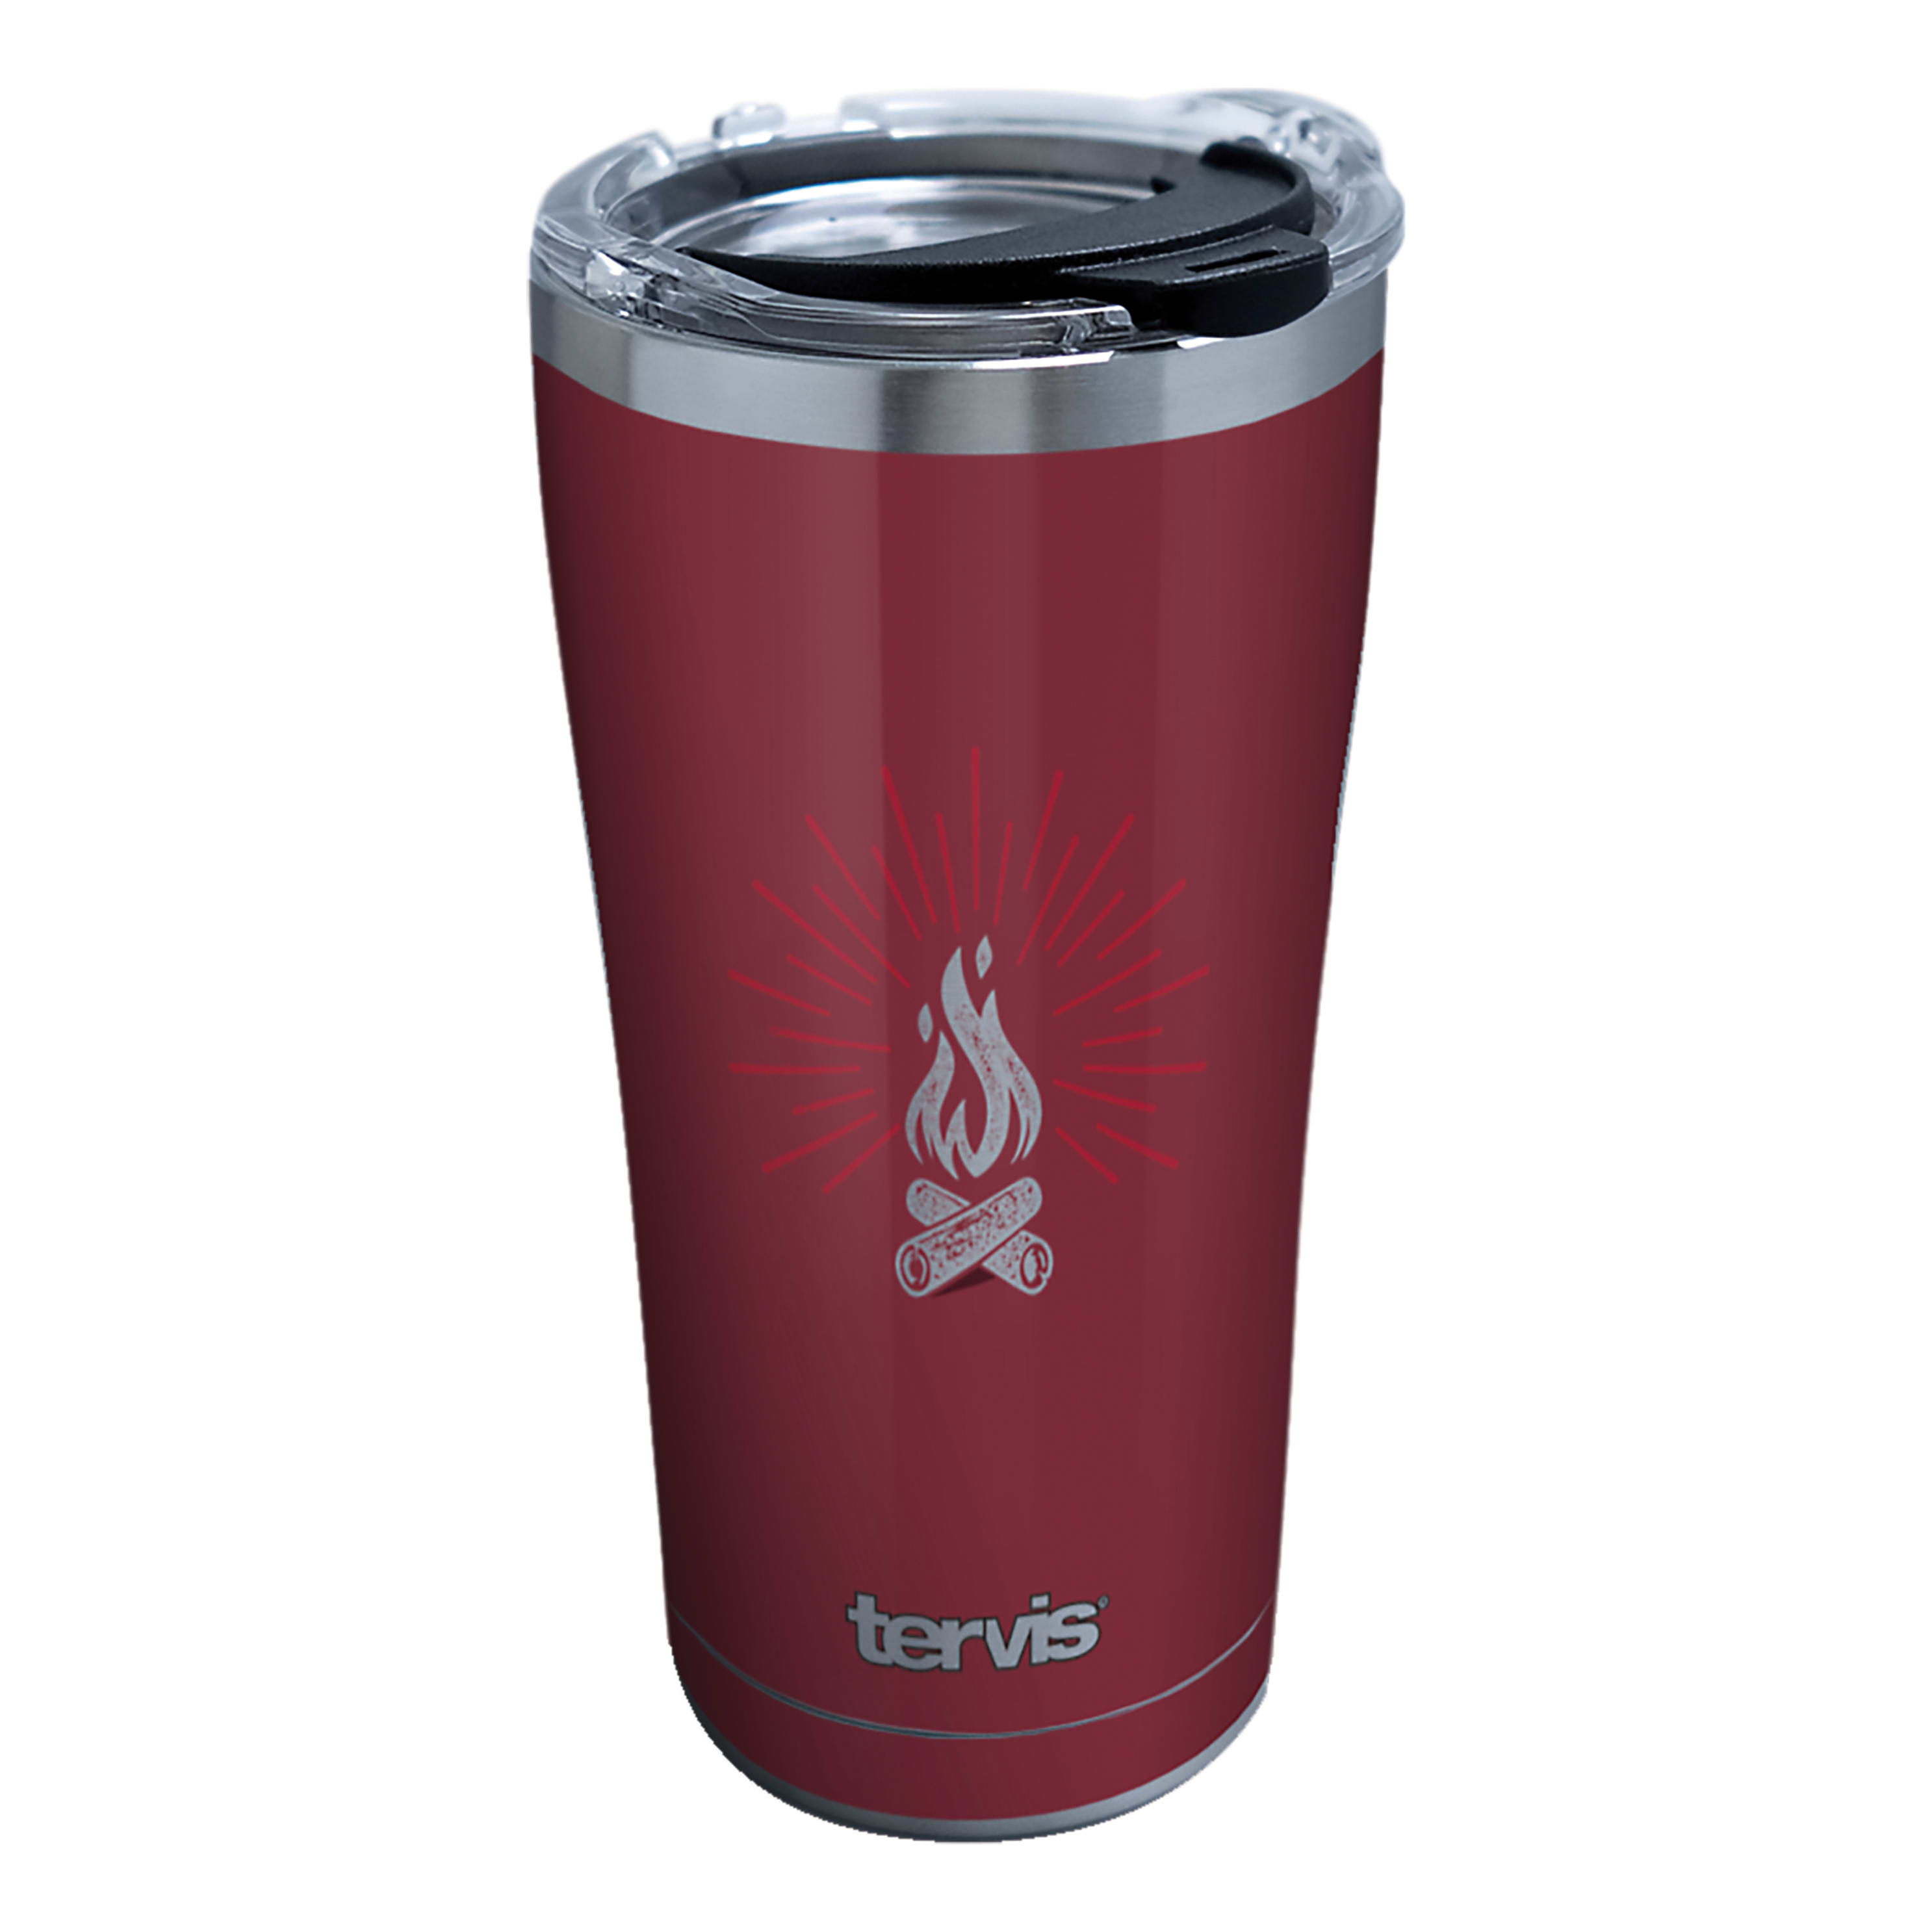 Tervis 20 oz. Stainless Steel Tumblers - Campfire